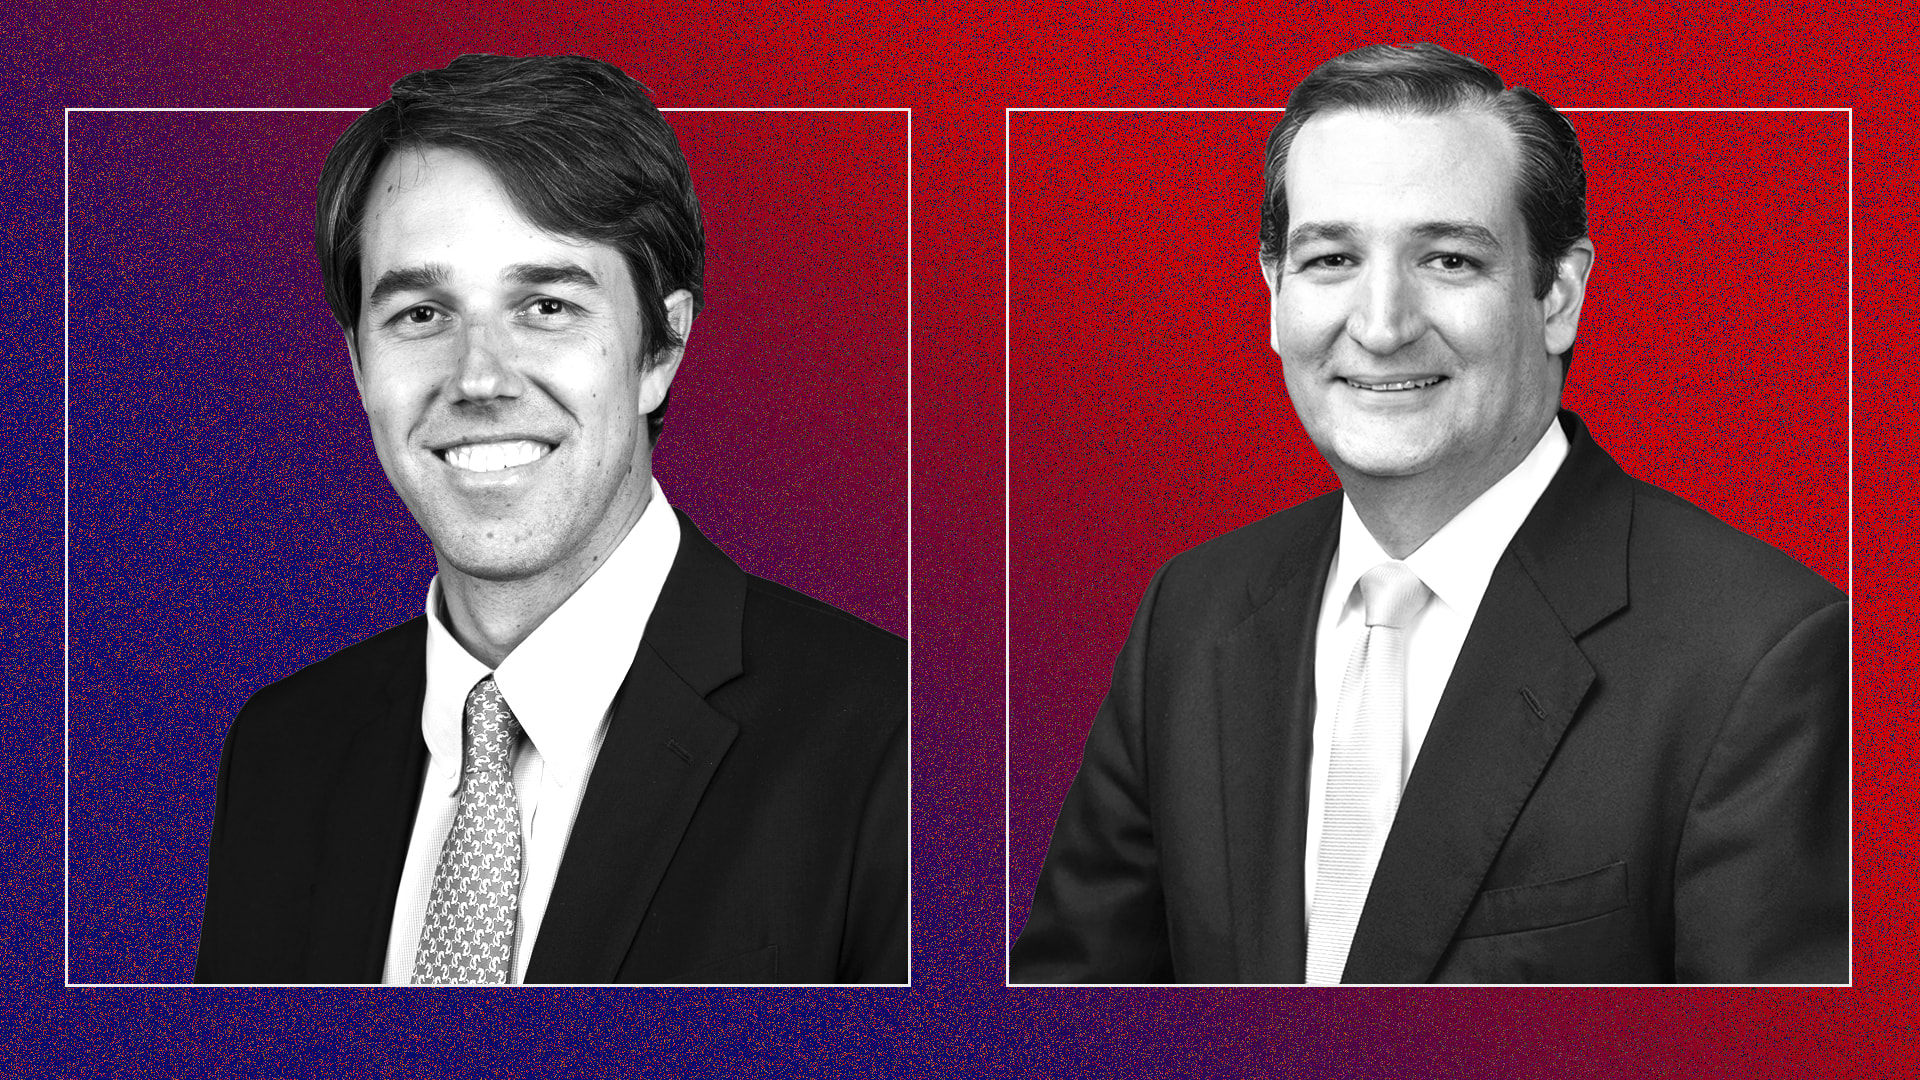 Beto O’Rourke comes close, but Texans go for Ted Cruz again